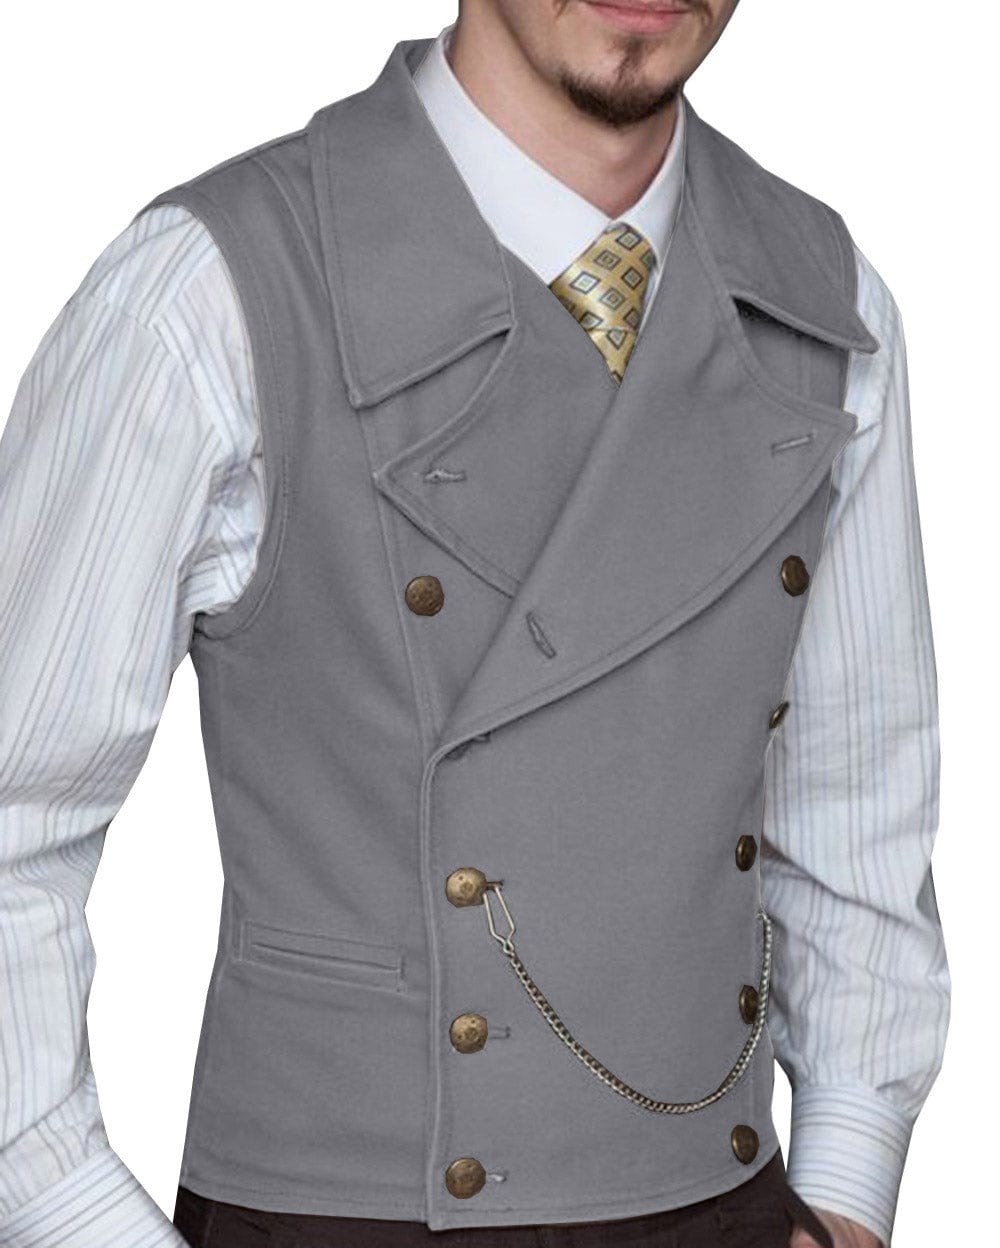 Casual Mens Double Breasted Suede Large Lapel Waistcoat menseventwear